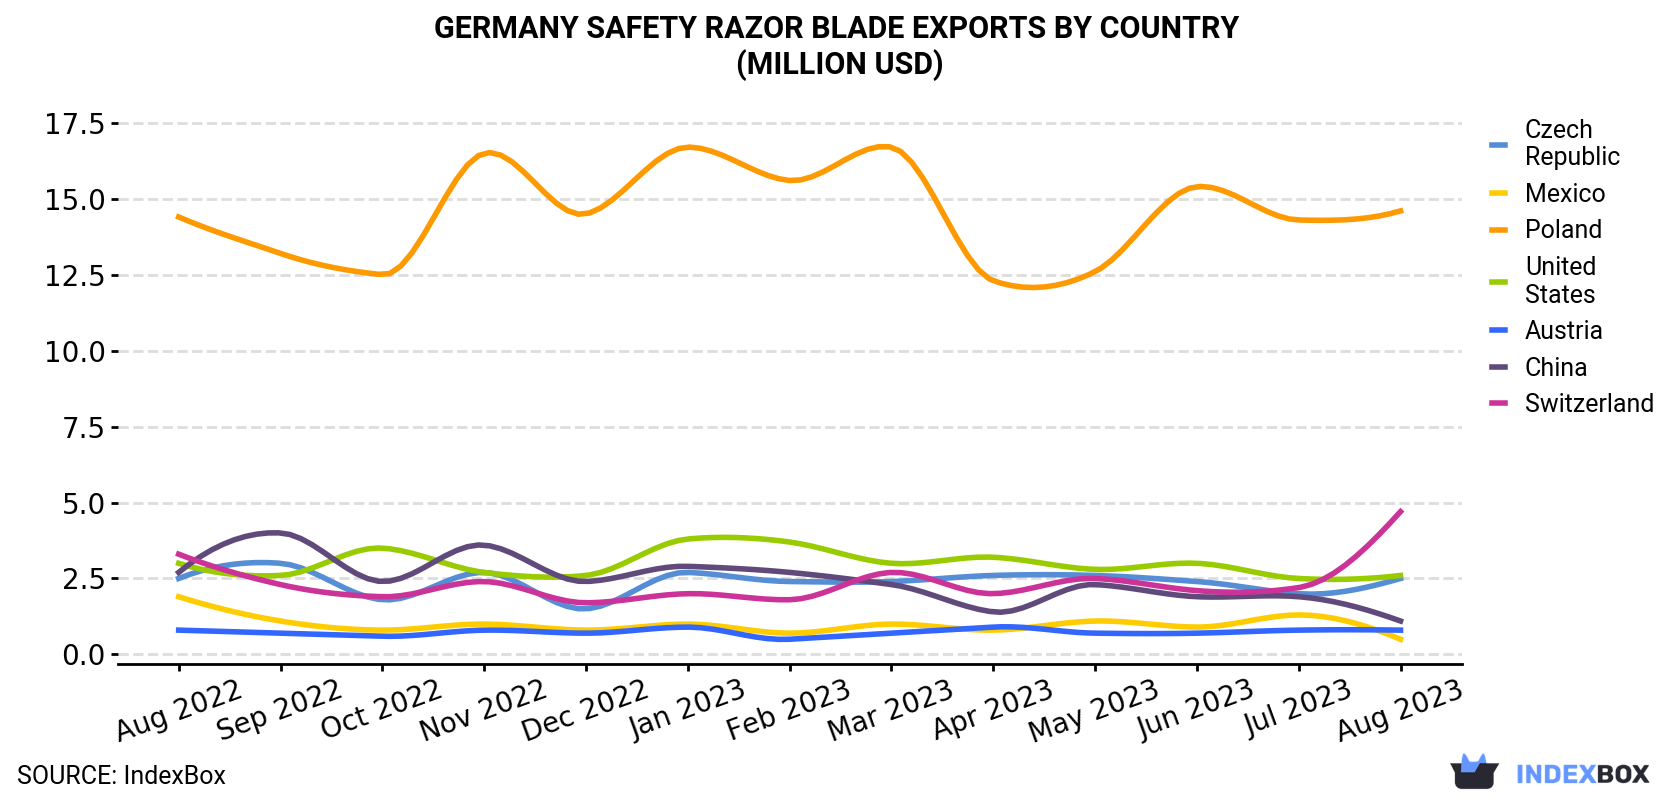 Germany Safety Razor Blade Exports By Country (Million USD)